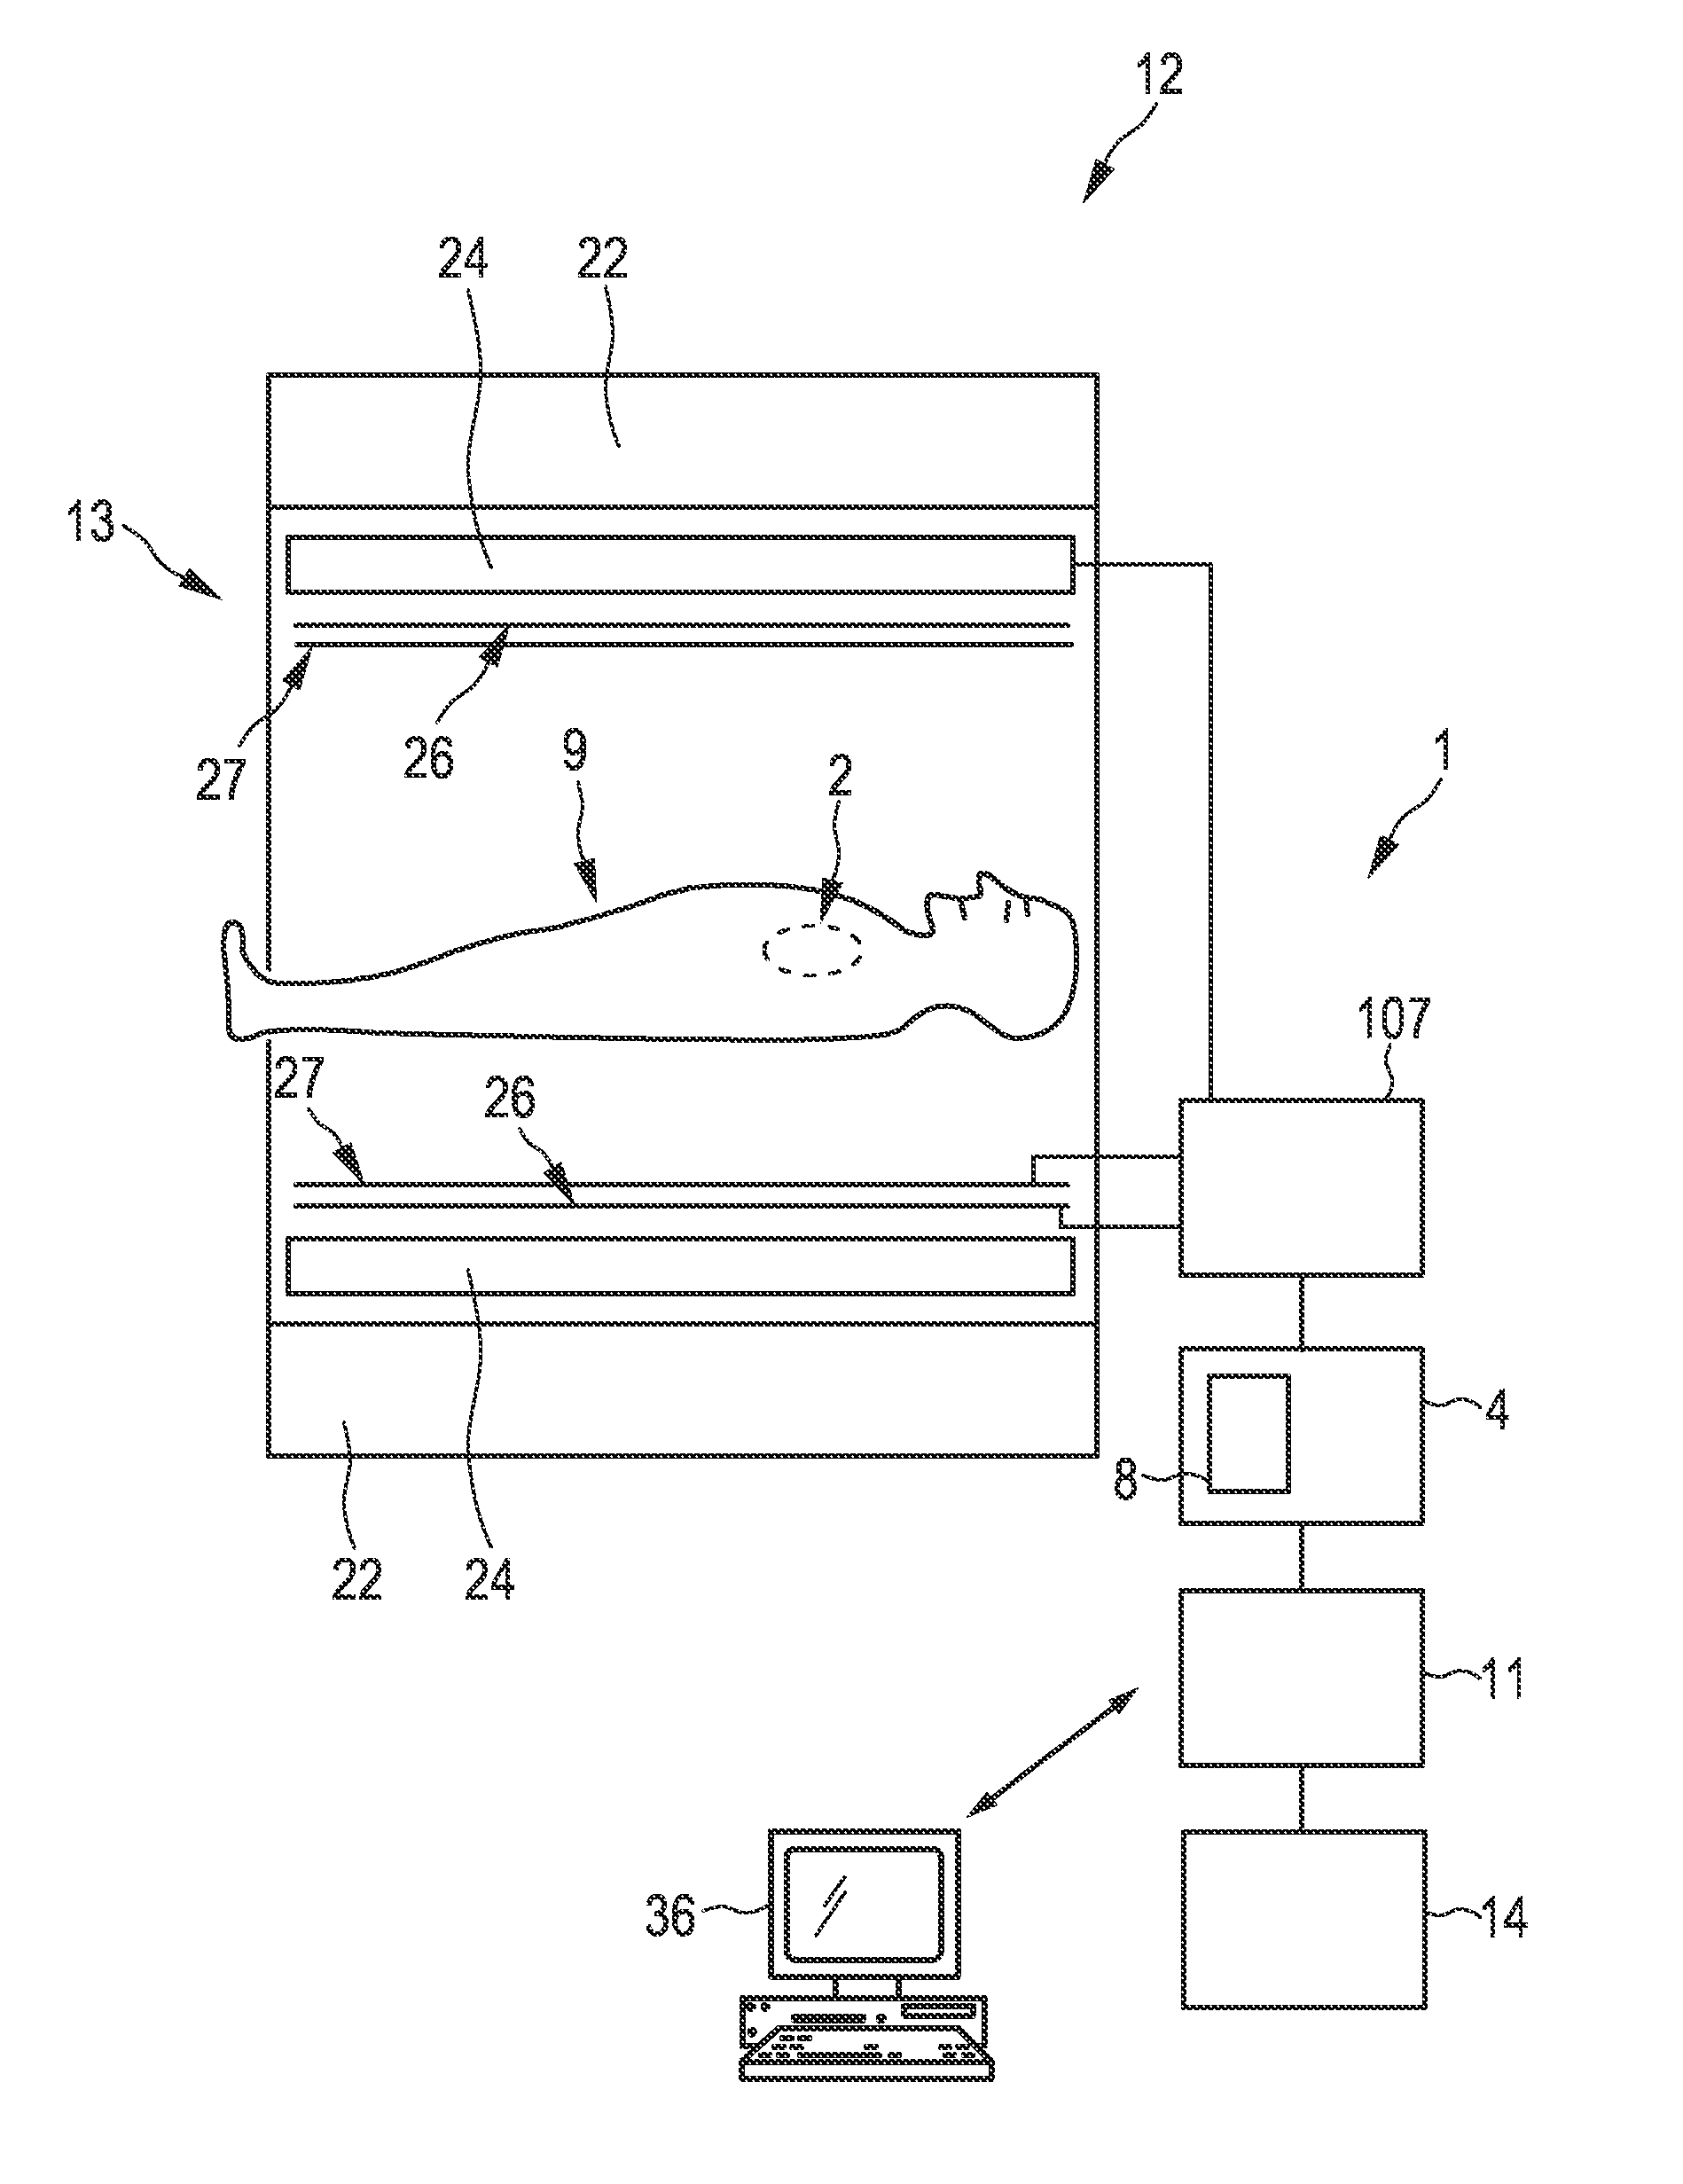 Motion monitoring system for monitoring motion within a region of interest